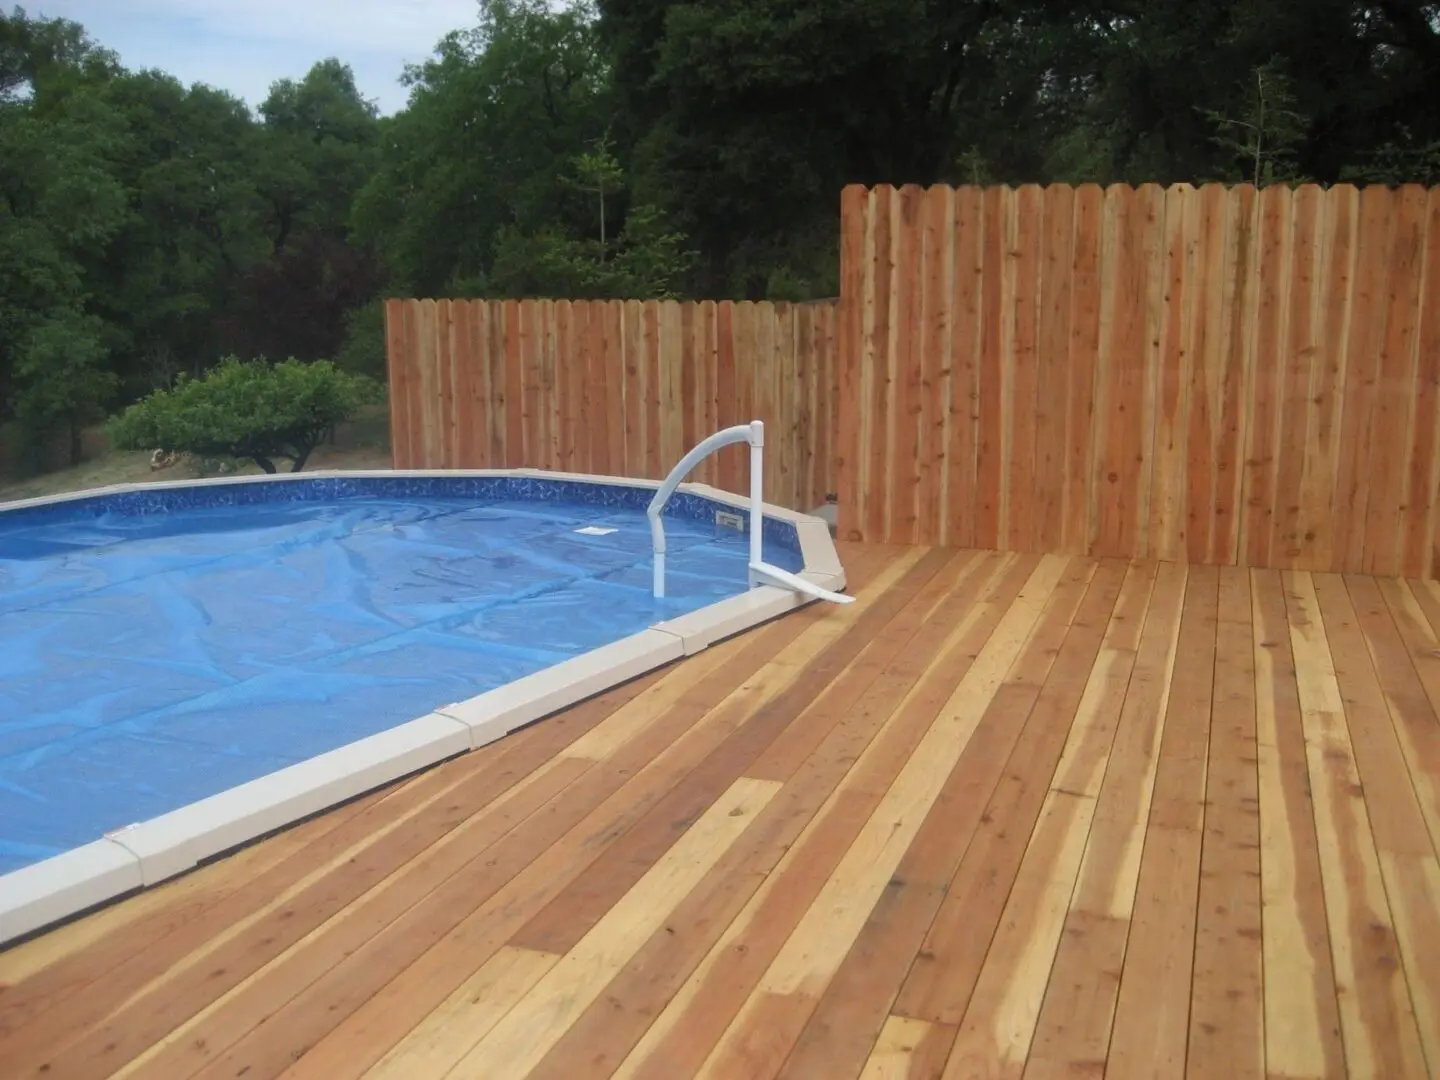 A pool with wooden deck and blue swimming pool.